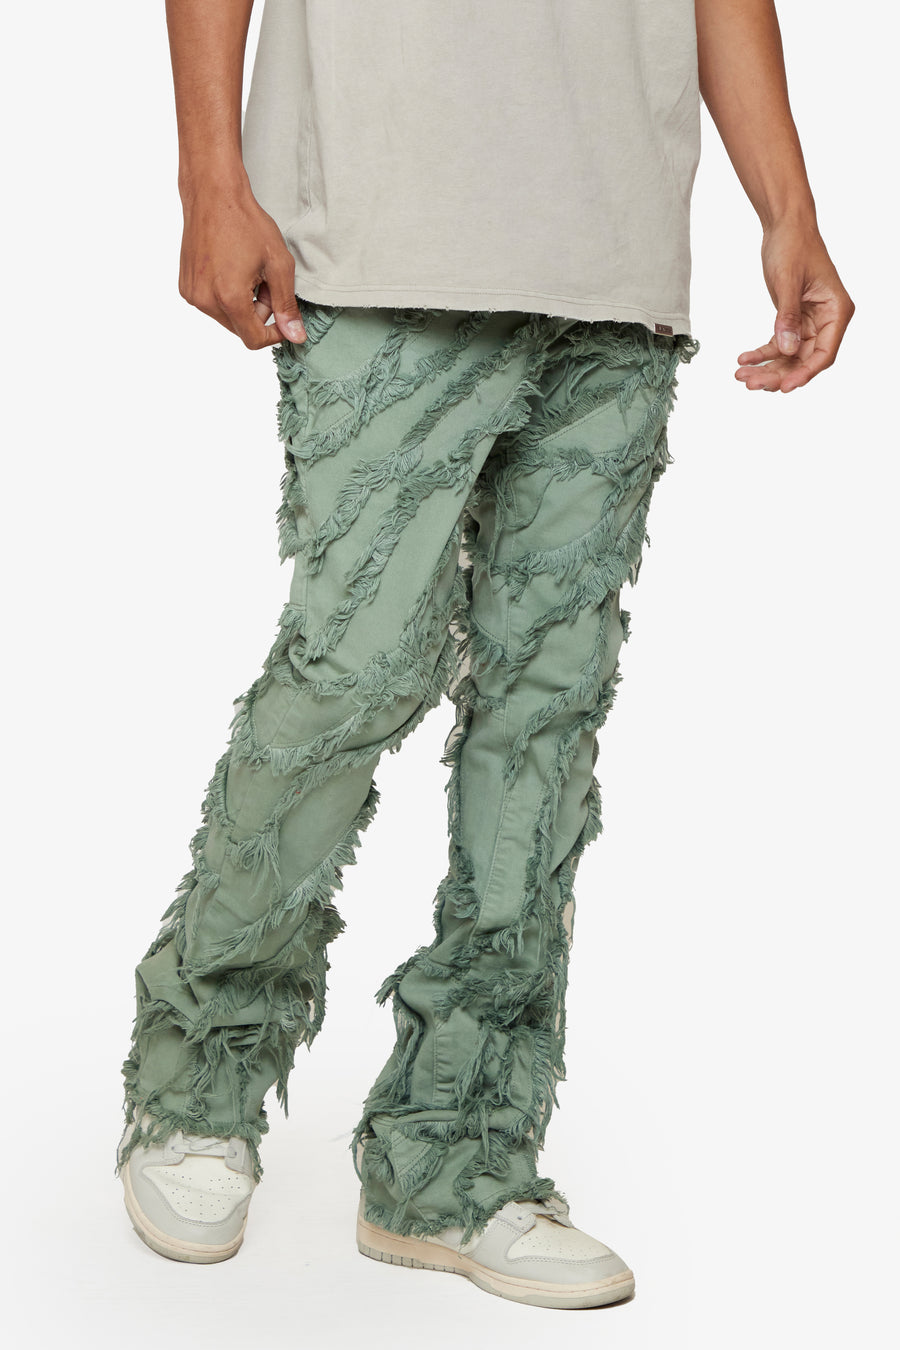 "GRIT” LIGHT EMERALD STACKED FLARE JEAN